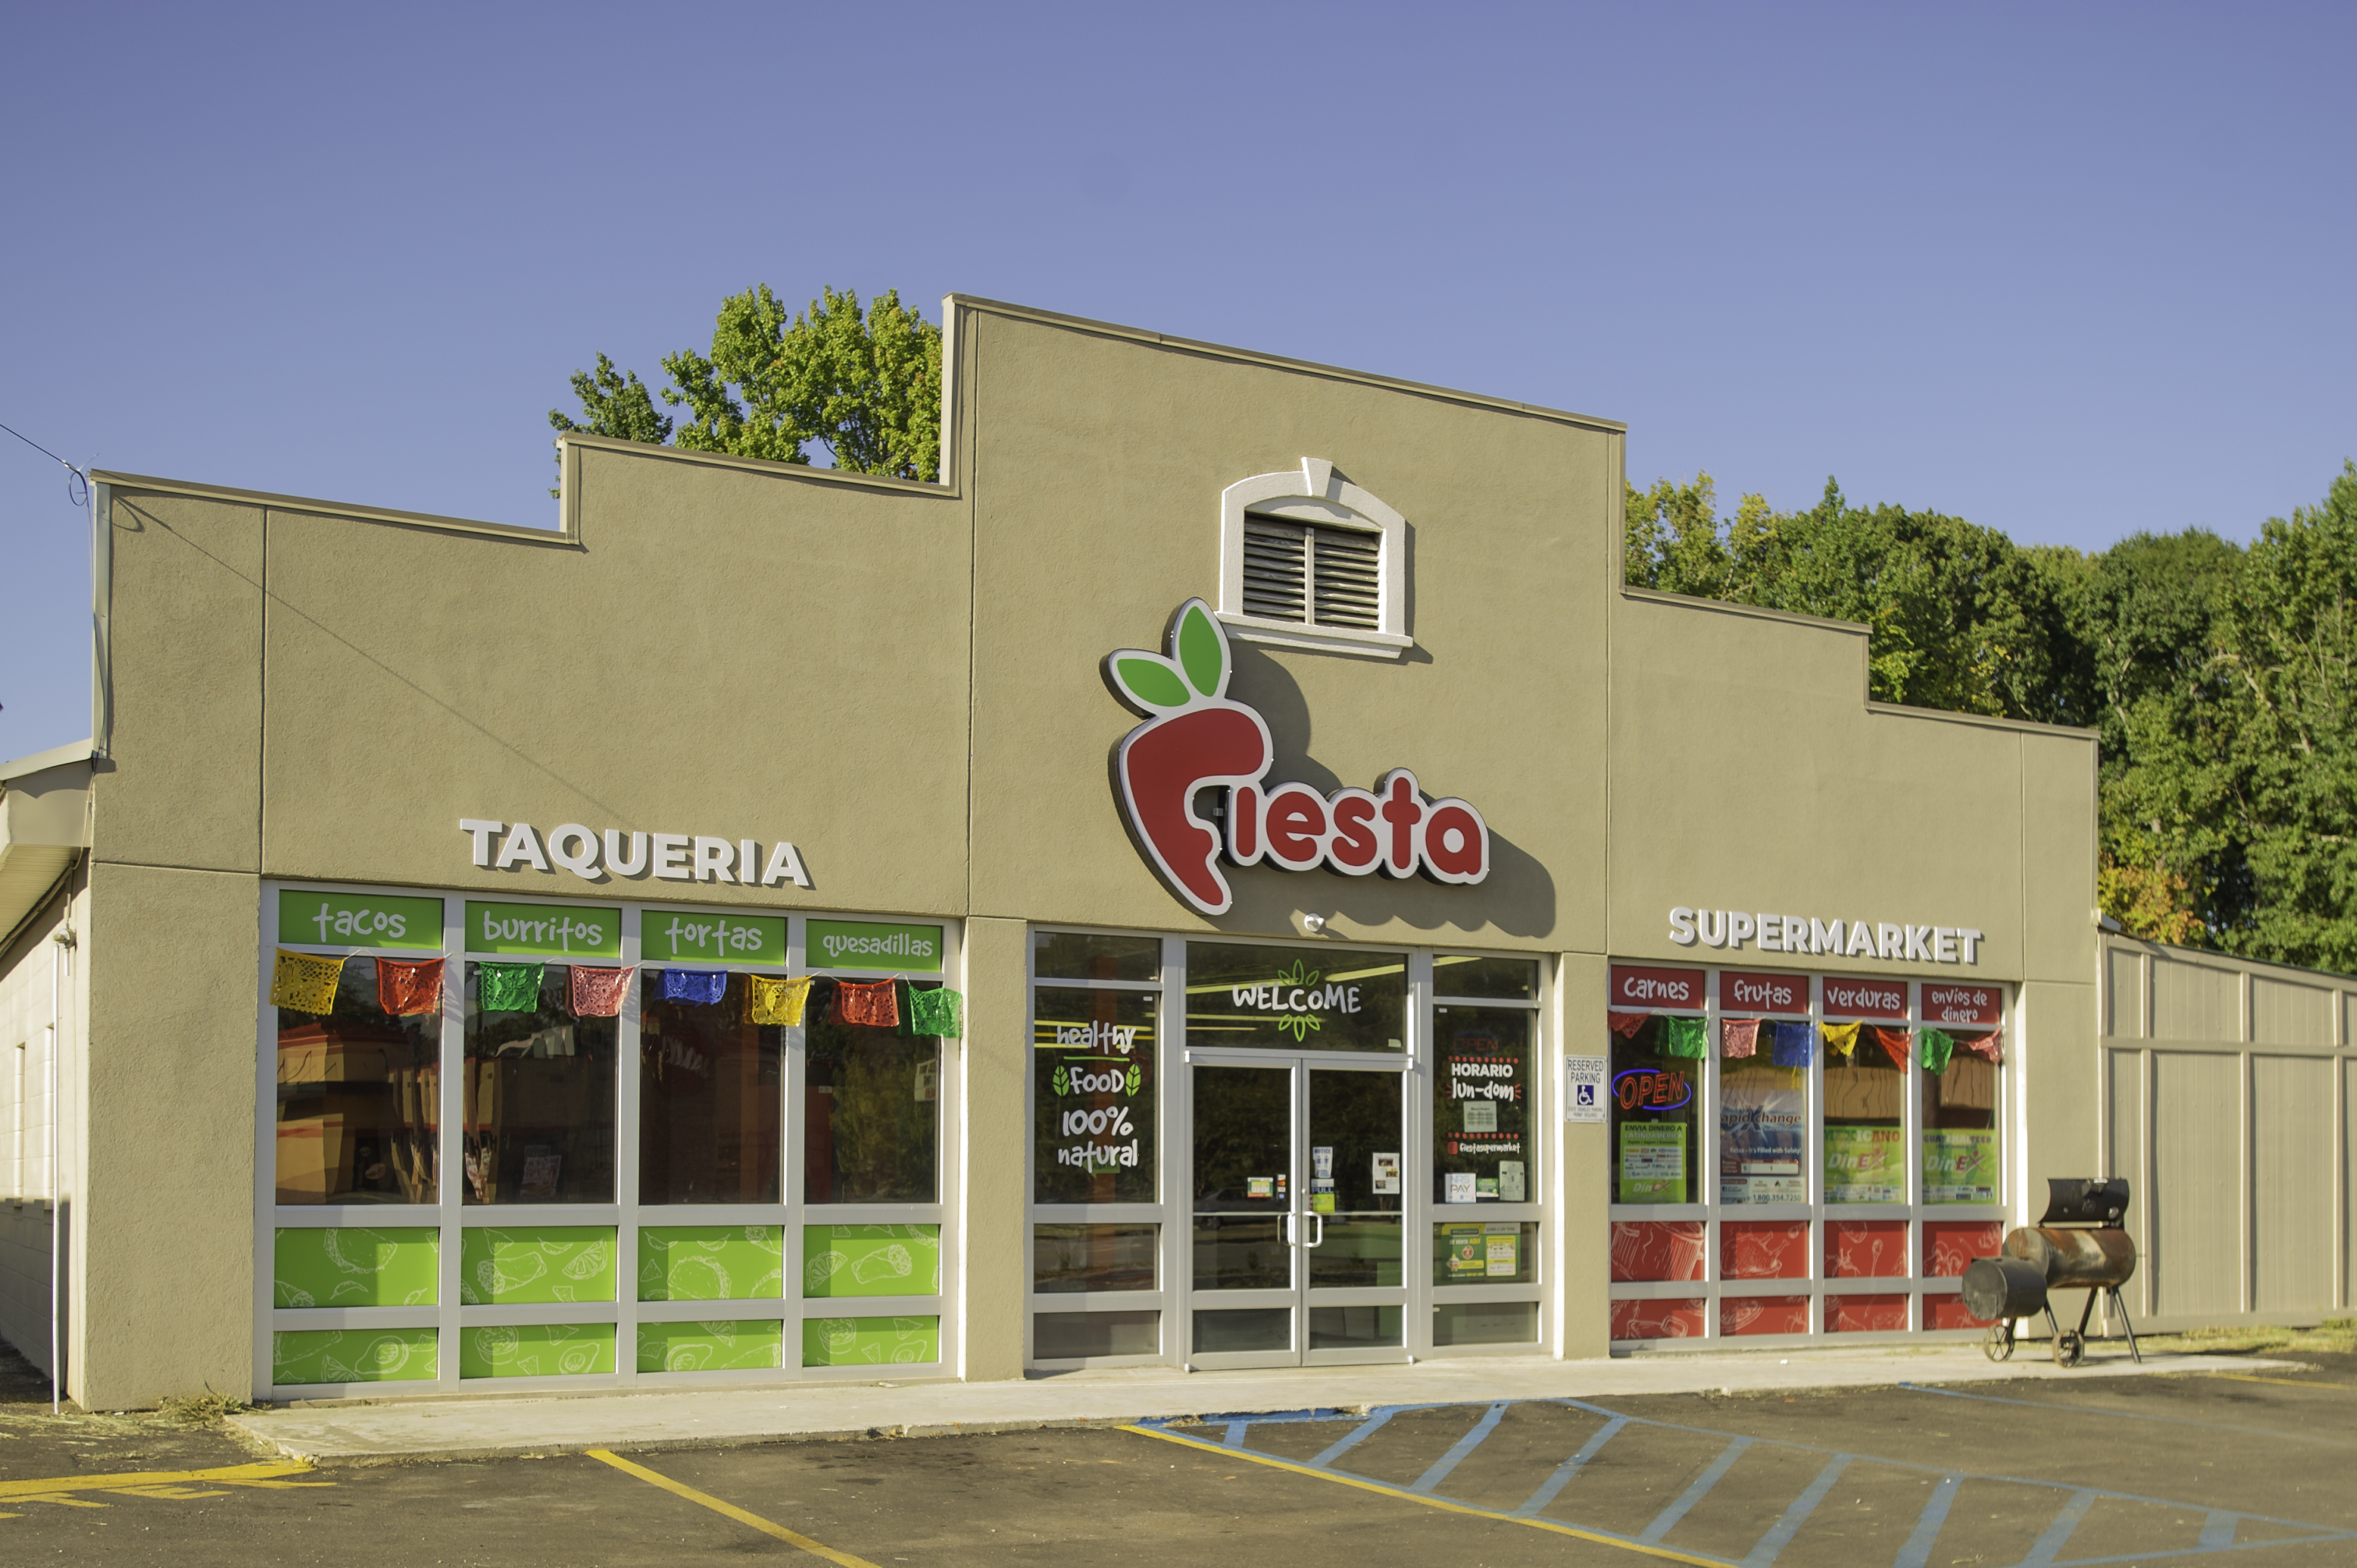 Find authentic Hispanic cuisine, grocery items at Opelika’s Fiesta Supermarket